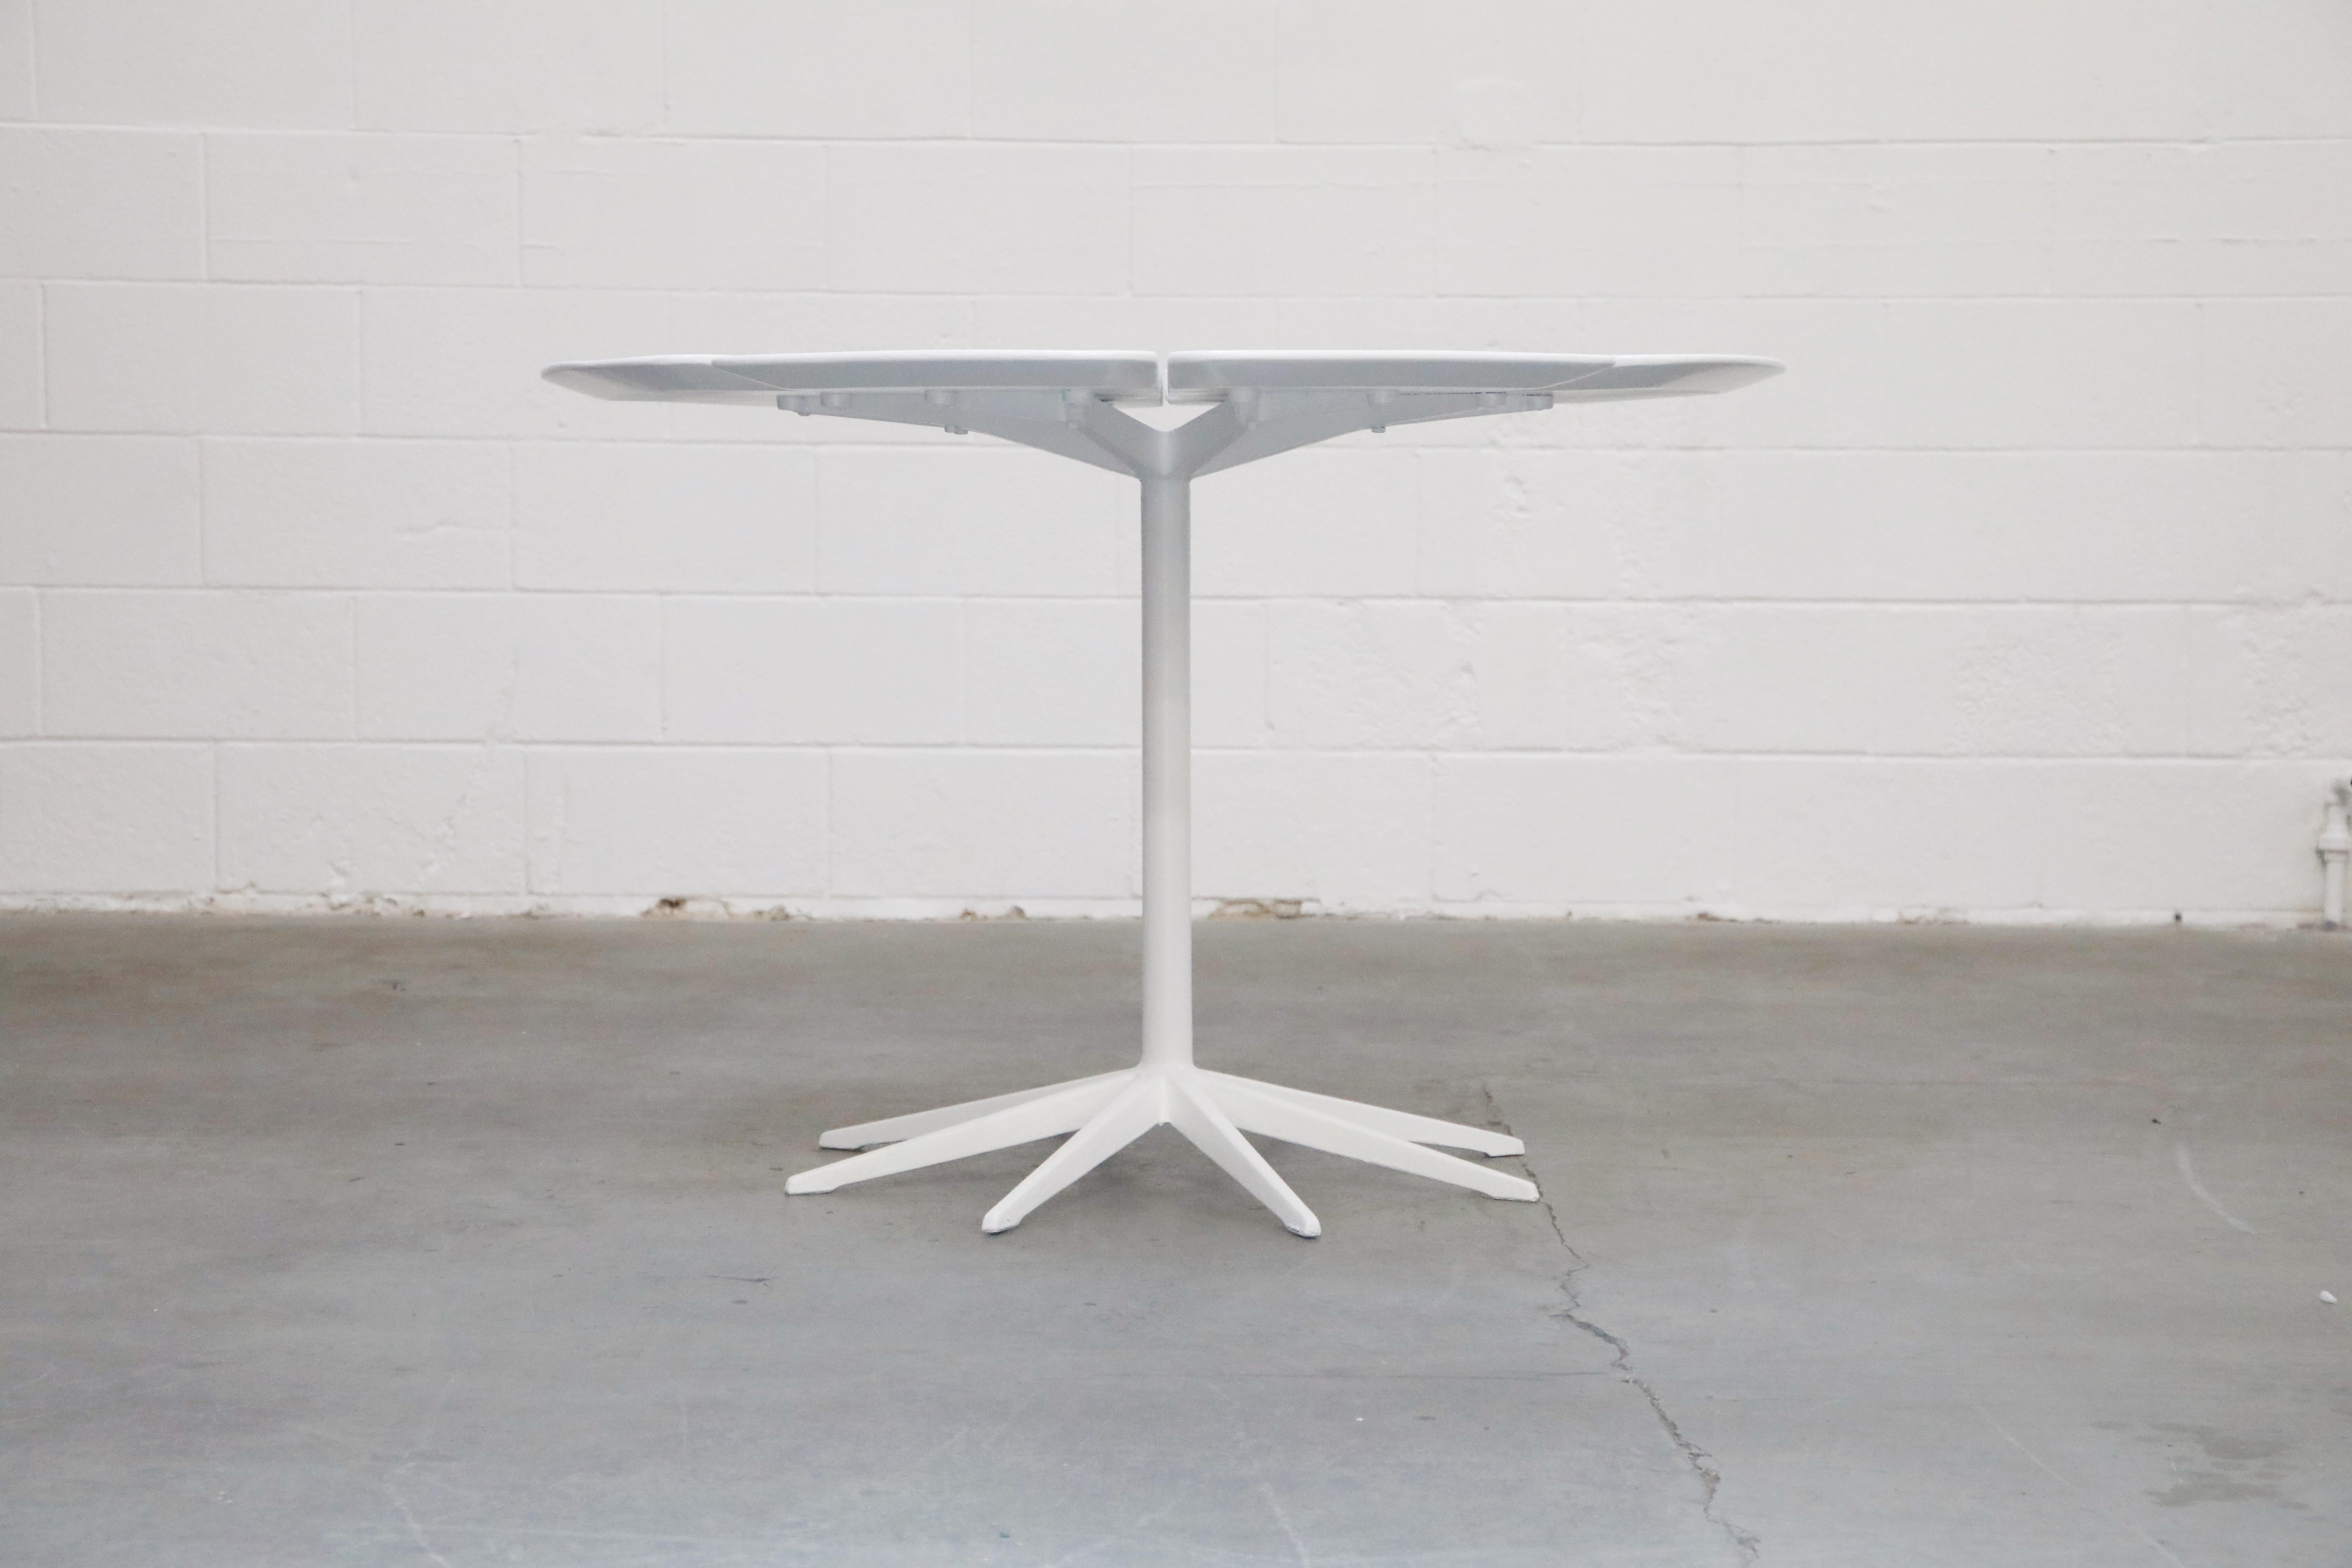 This early production 'Petal' dining table by Richard Schultz for Knoll International, signed with label underneath, has been restored and is in beautiful refinished condition, ready for immediate use. Designed in 1960, this example produced in